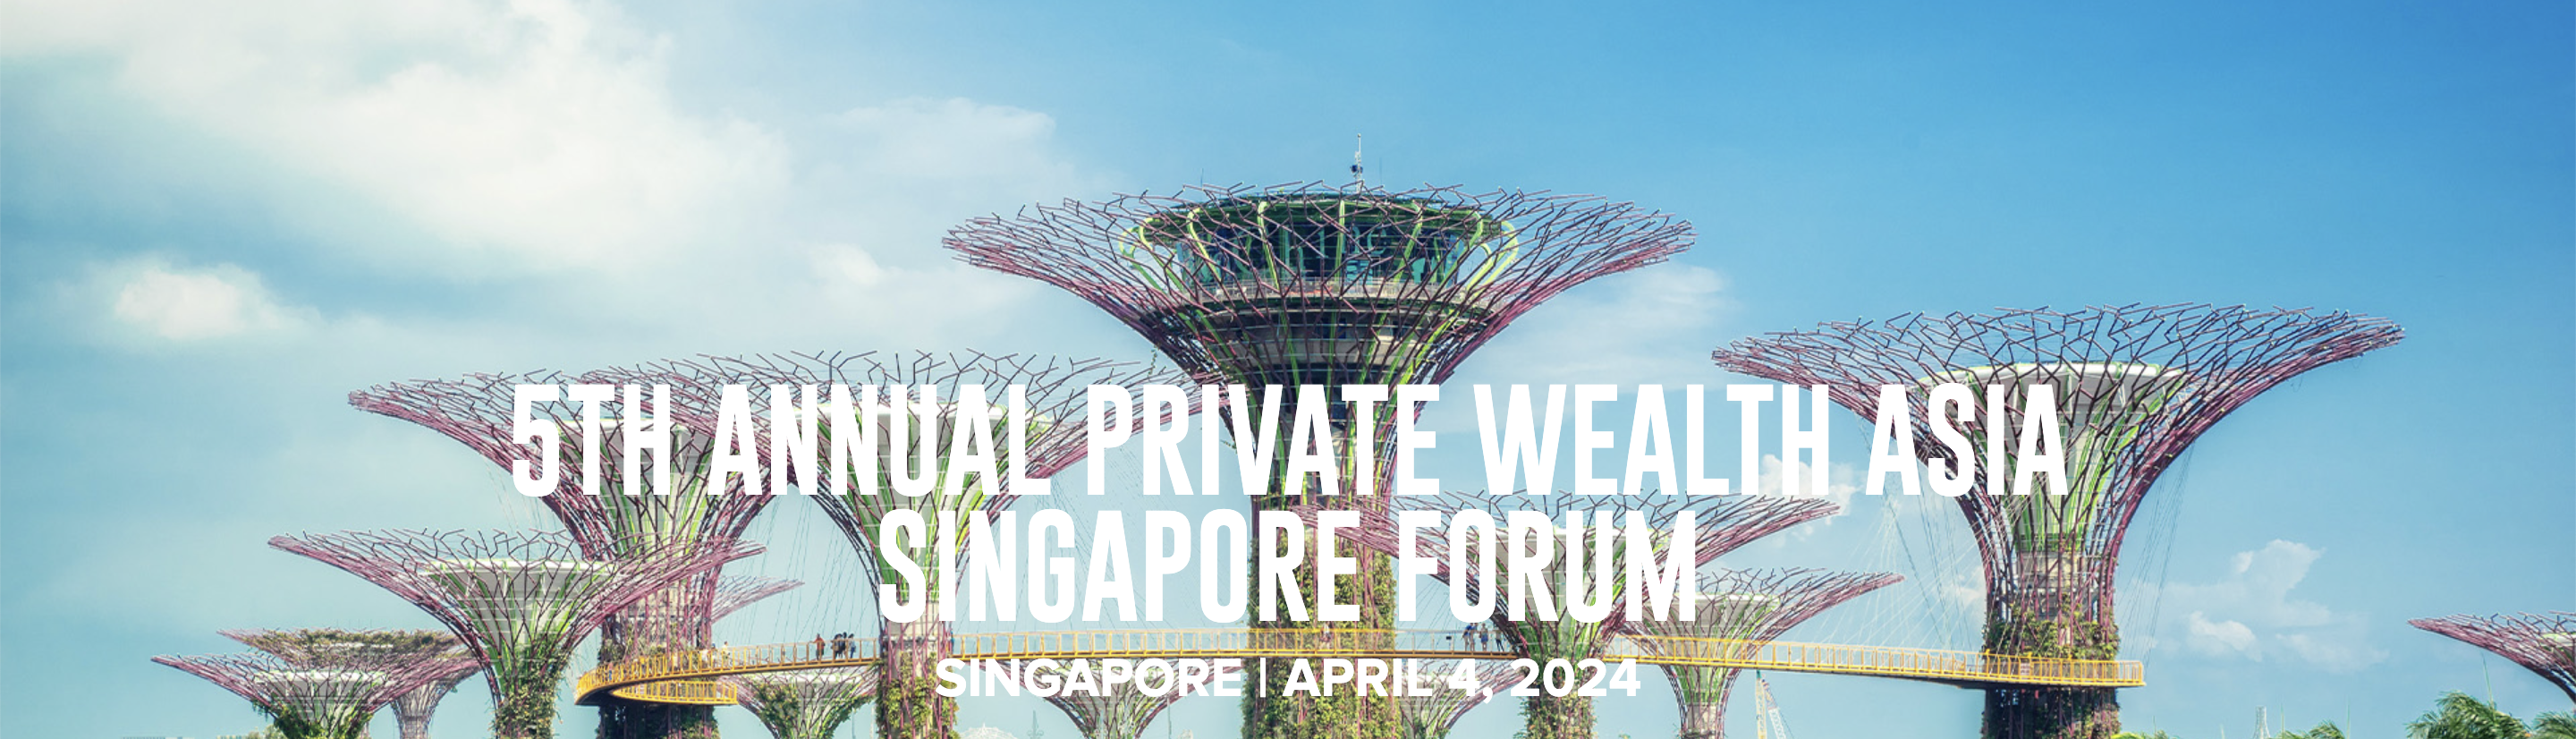 5th Annual Private Wealth Asia Singapore Forum » c*funds